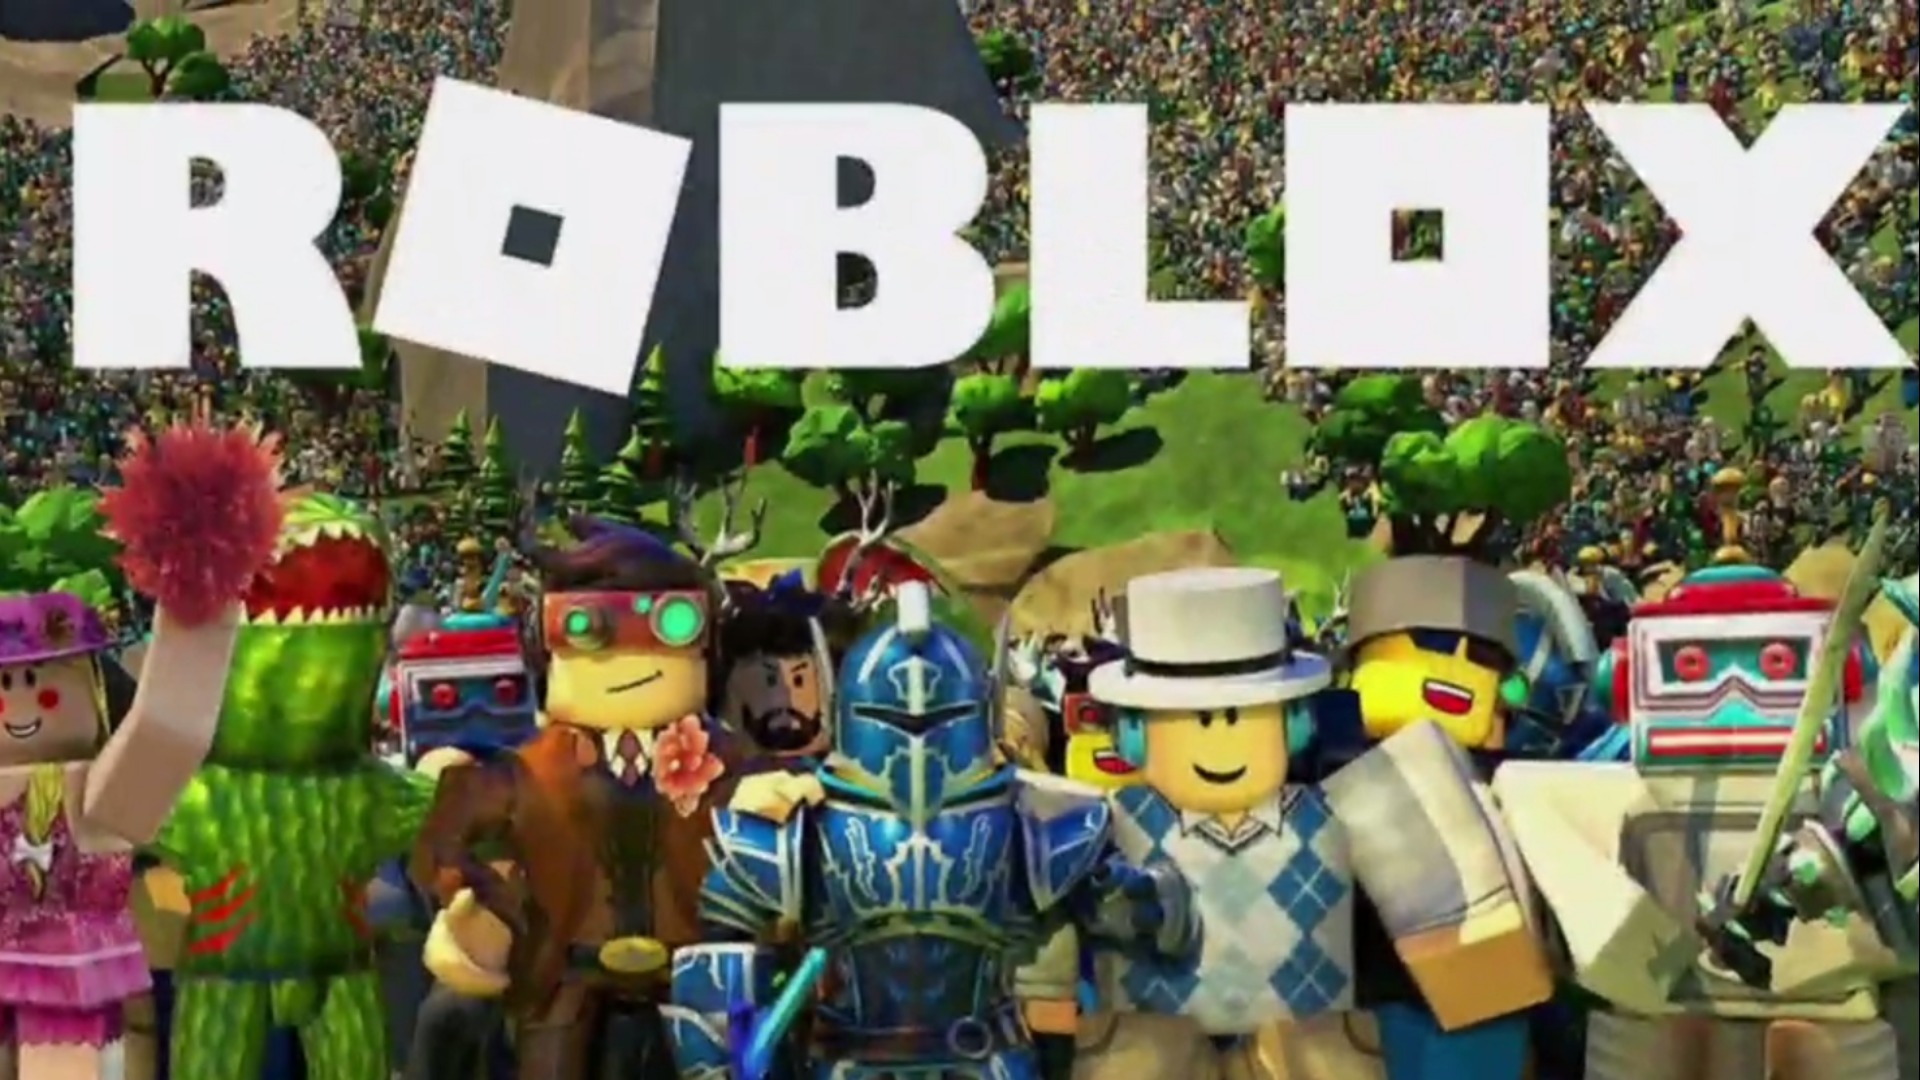 New Questions About Some Inappropriate Content On The Gaming Platform Roblox Video - roblox in 2005 login games